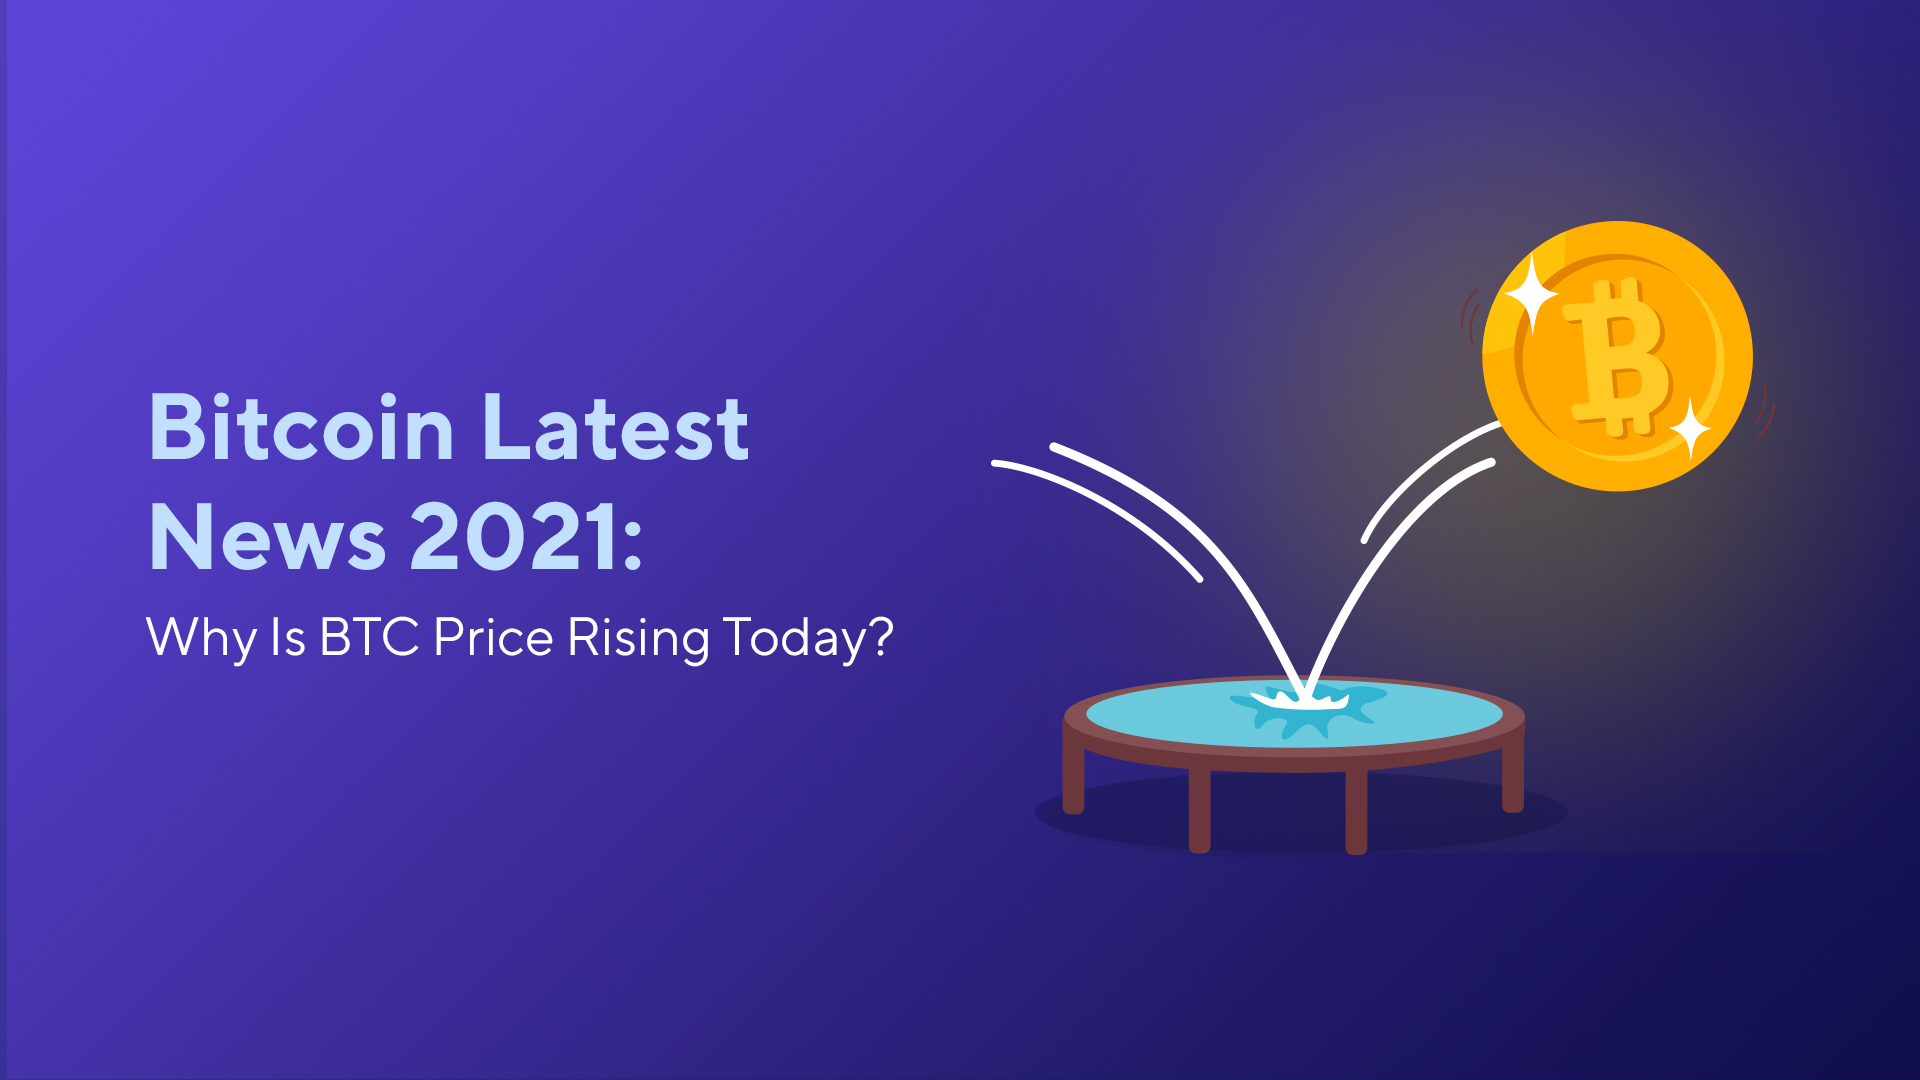 Bitcoin Latest News 2021: Why Is BTC Price Rising Today?